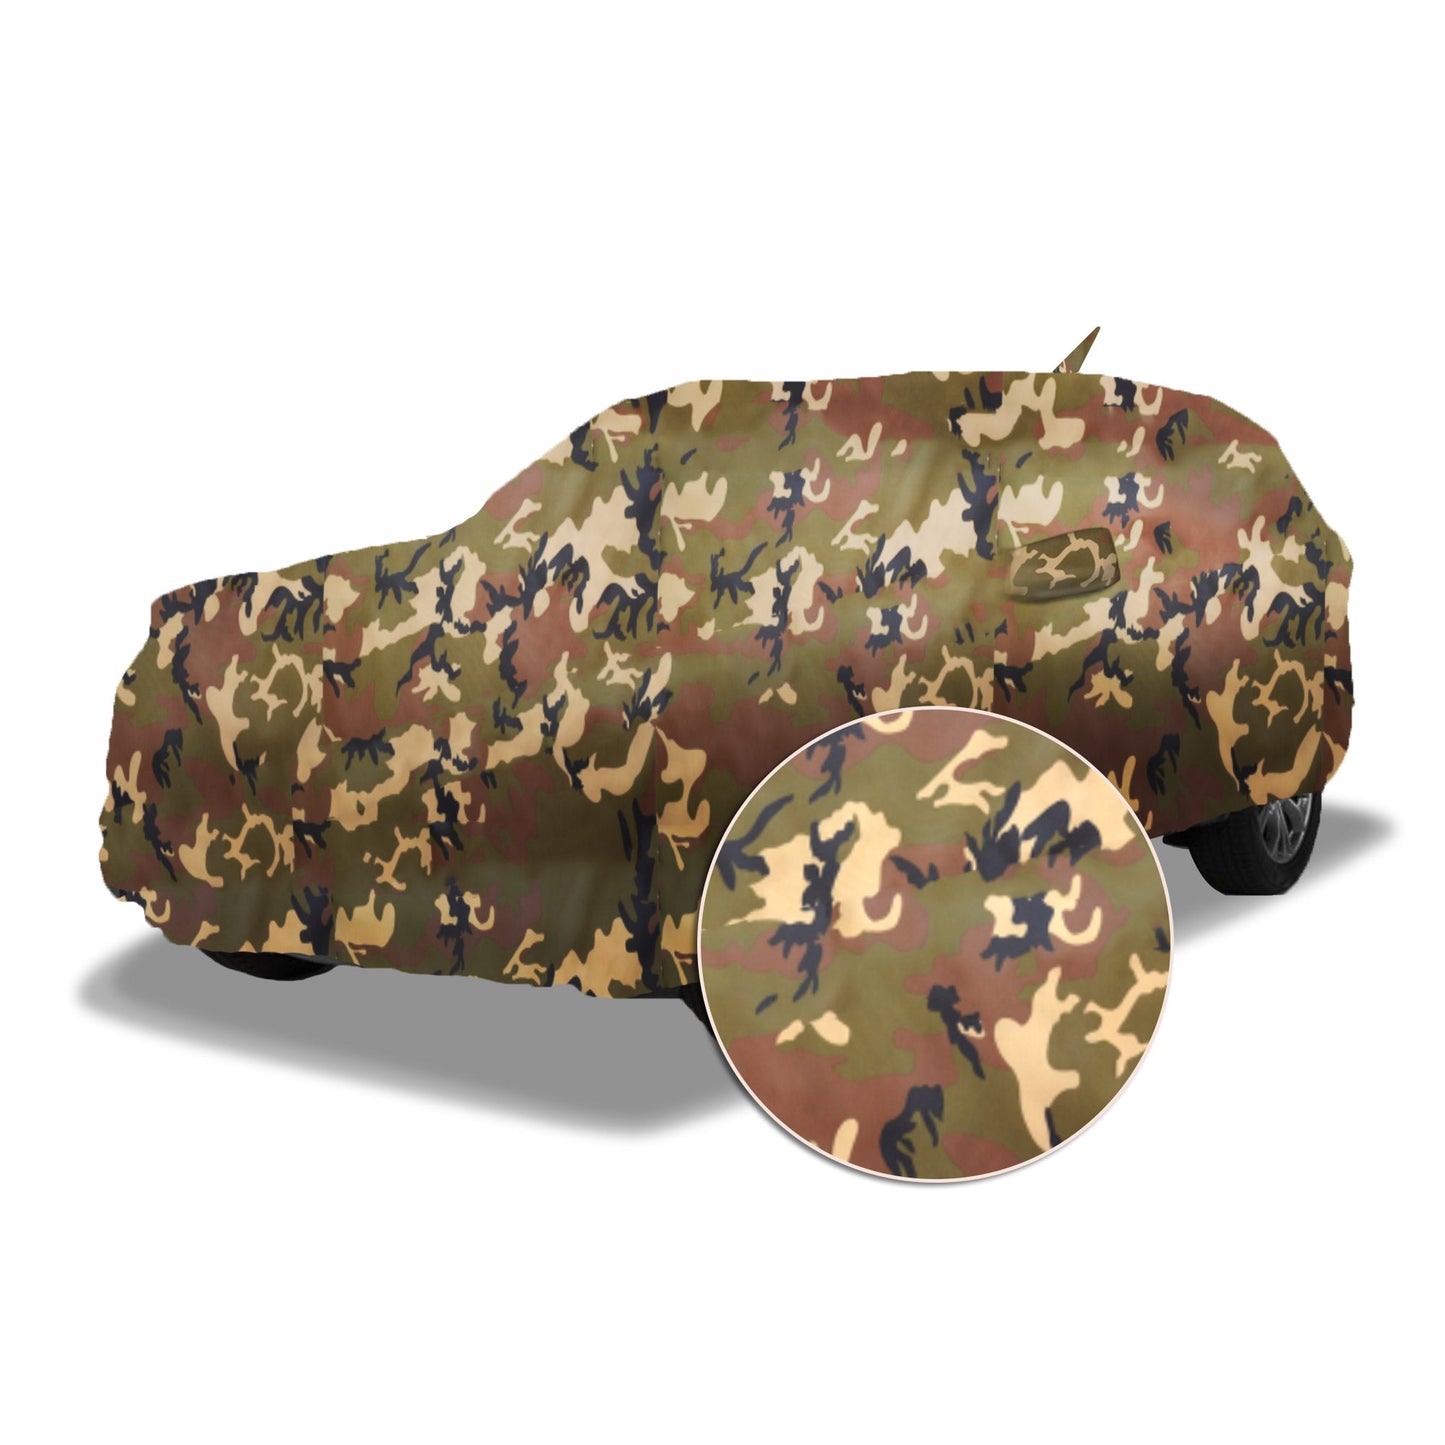 Ascot Swift Car Body Cover 2005-2011 Model Extra Strong & Dust Proof Jungle Military Car Cover with UV Proof & Water-Resistant Coating